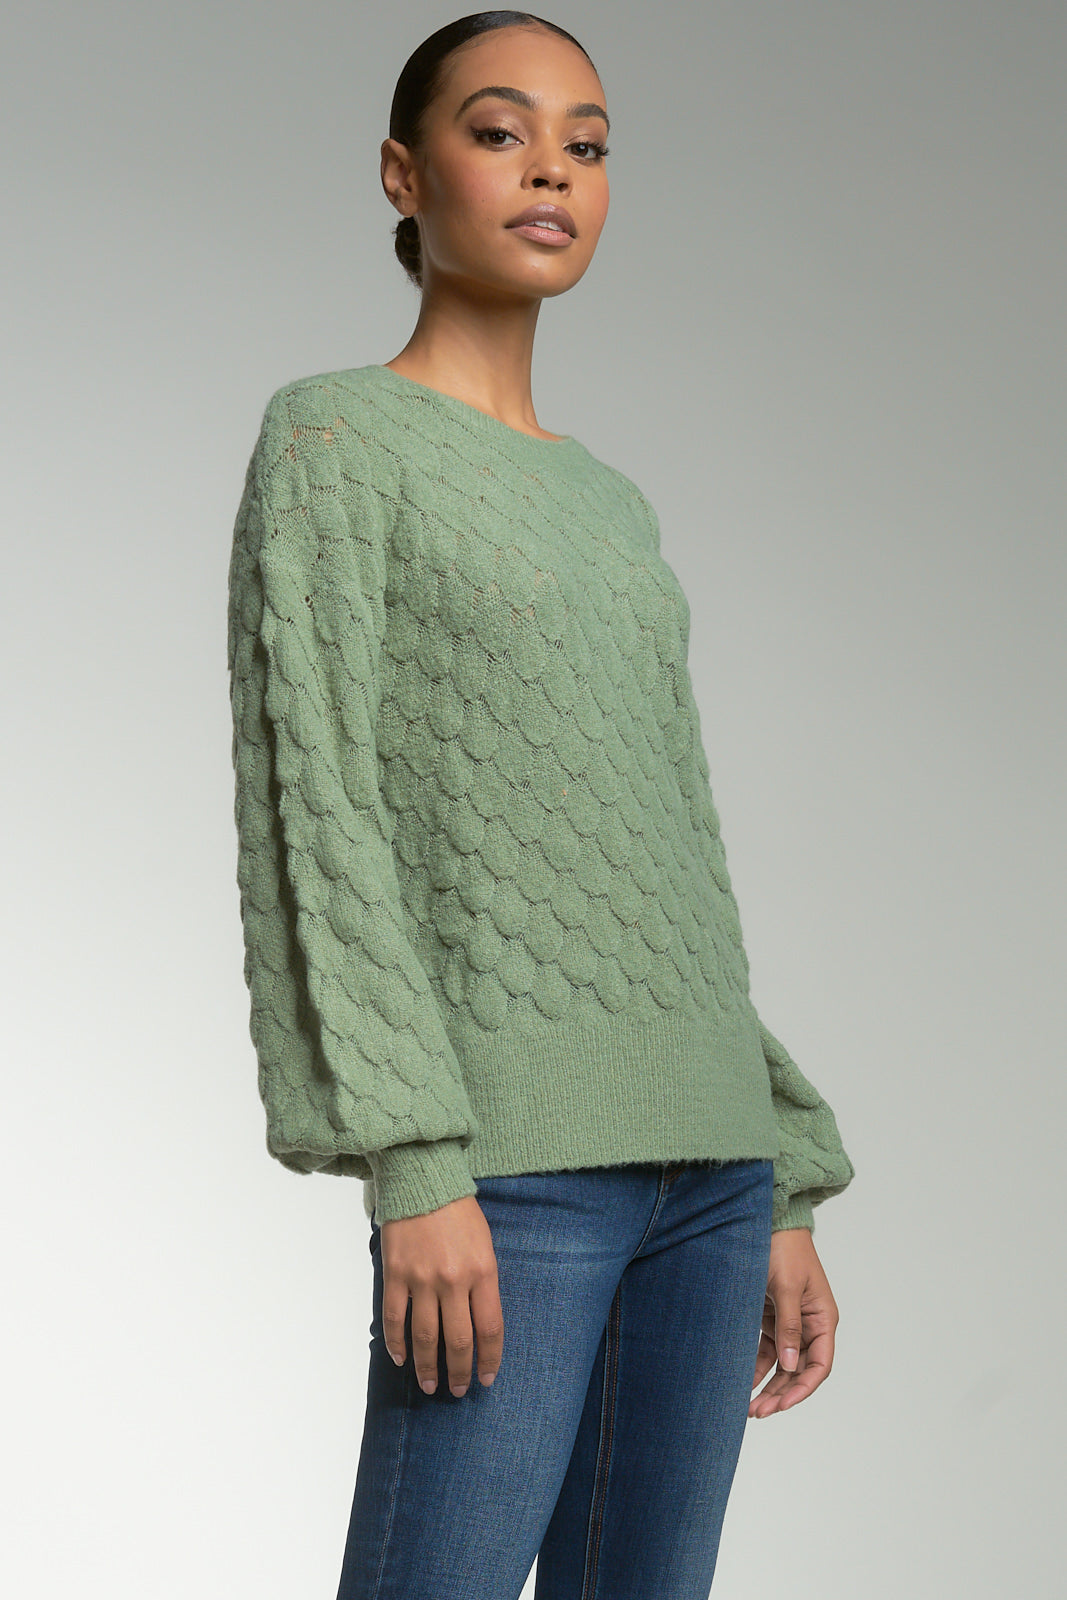 Green Leaf Crewneck Sweater with Bubble Texture